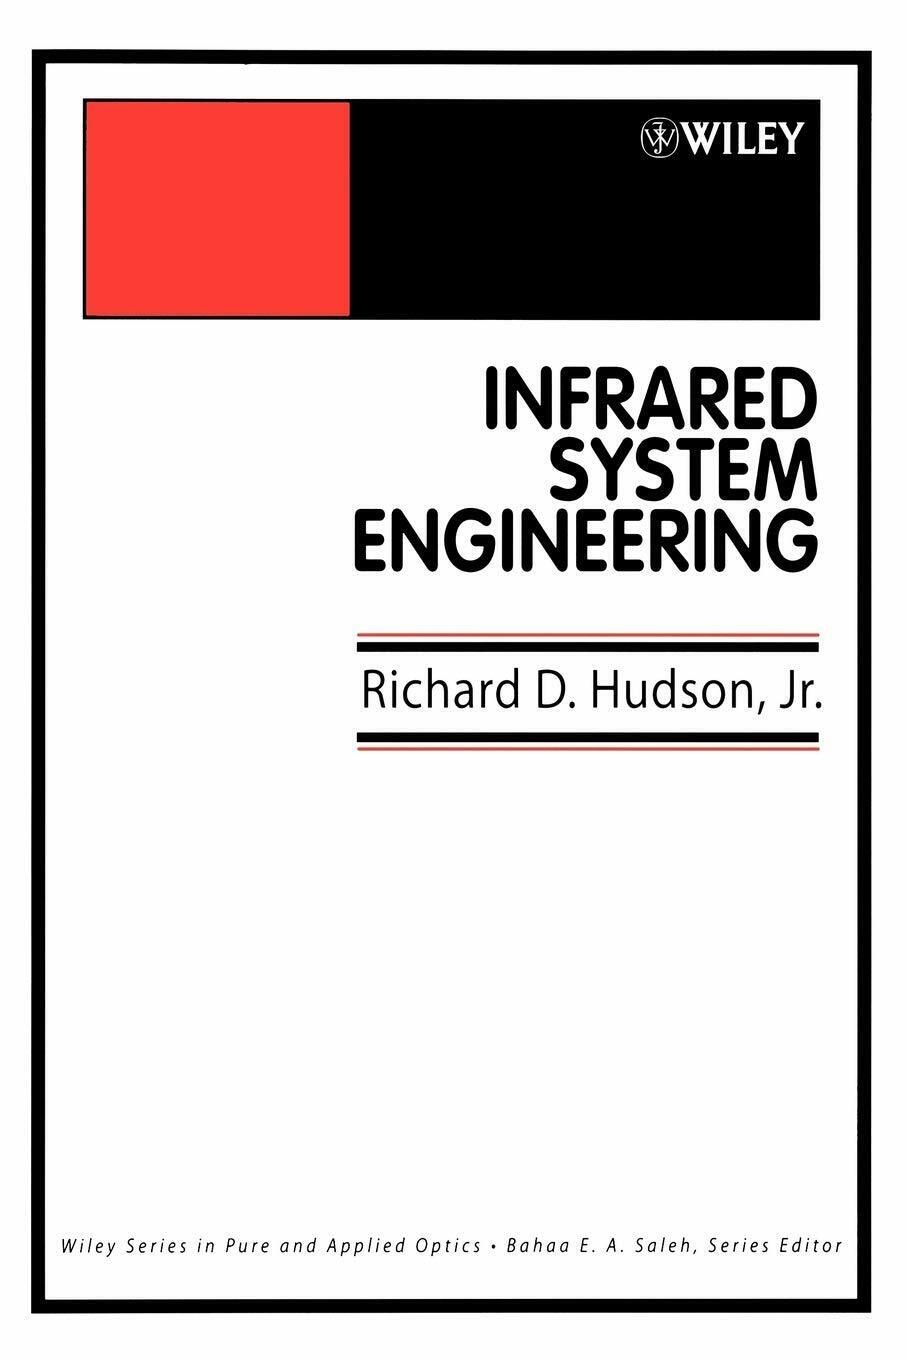 Infrared System Engineering P - Hudson - John Wiley & Sons, 2006